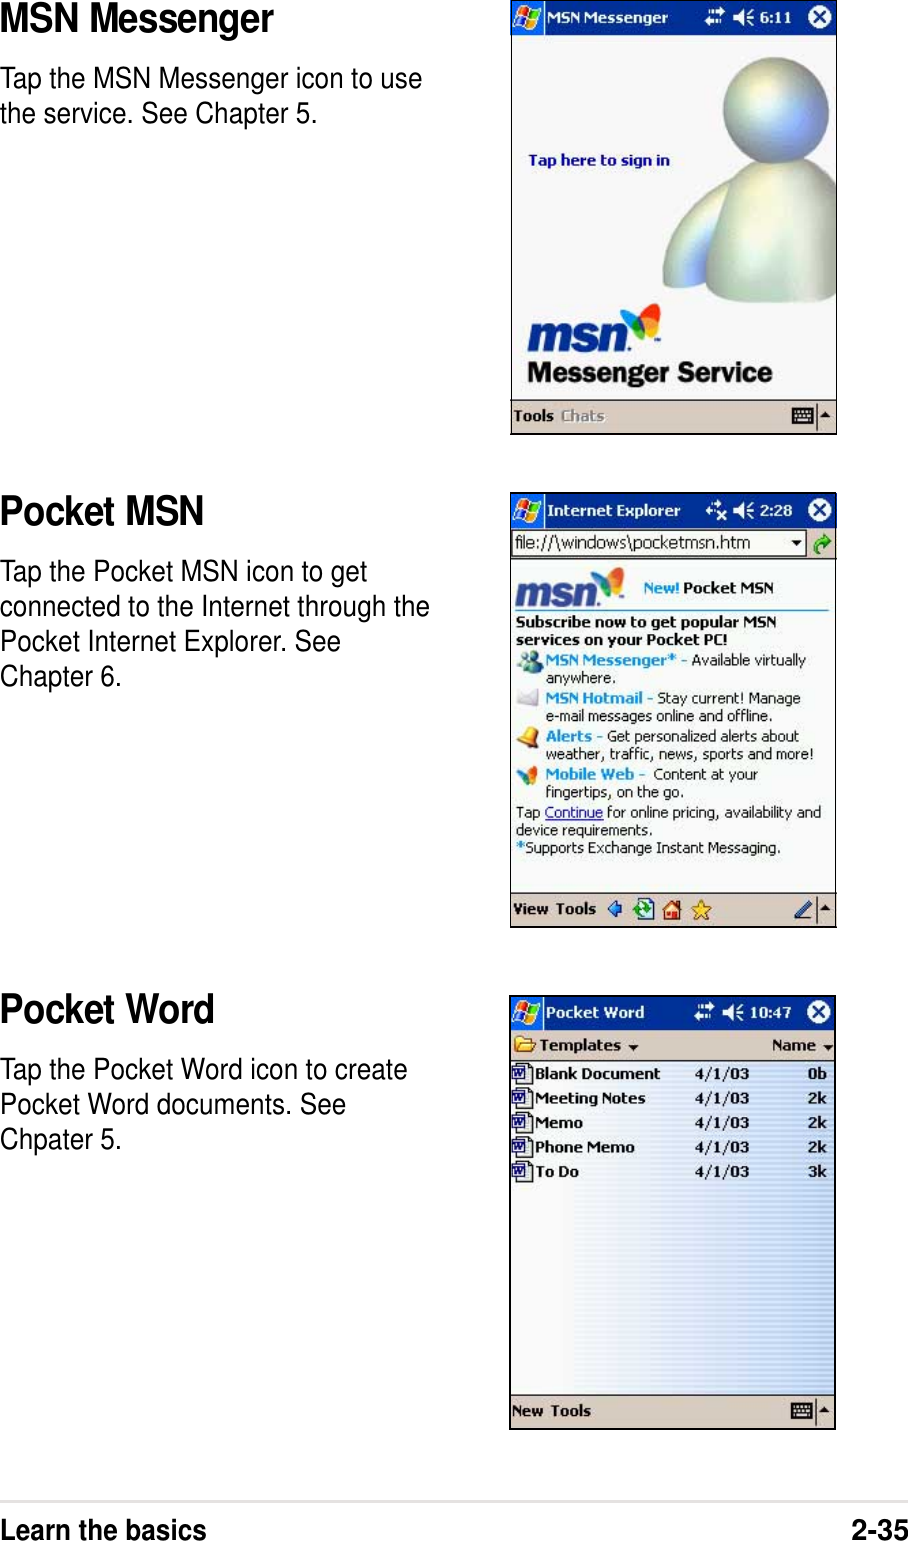 Learn the basics2-35MSN MessengerTap the MSN Messenger icon to usethe service. See Chapter 5.Pocket MSNTap the Pocket MSN icon to getconnected to the Internet through thePocket Internet Explorer. SeeChapter 6.Pocket WordTap the Pocket Word icon to createPocket Word documents. SeeChpater 5.